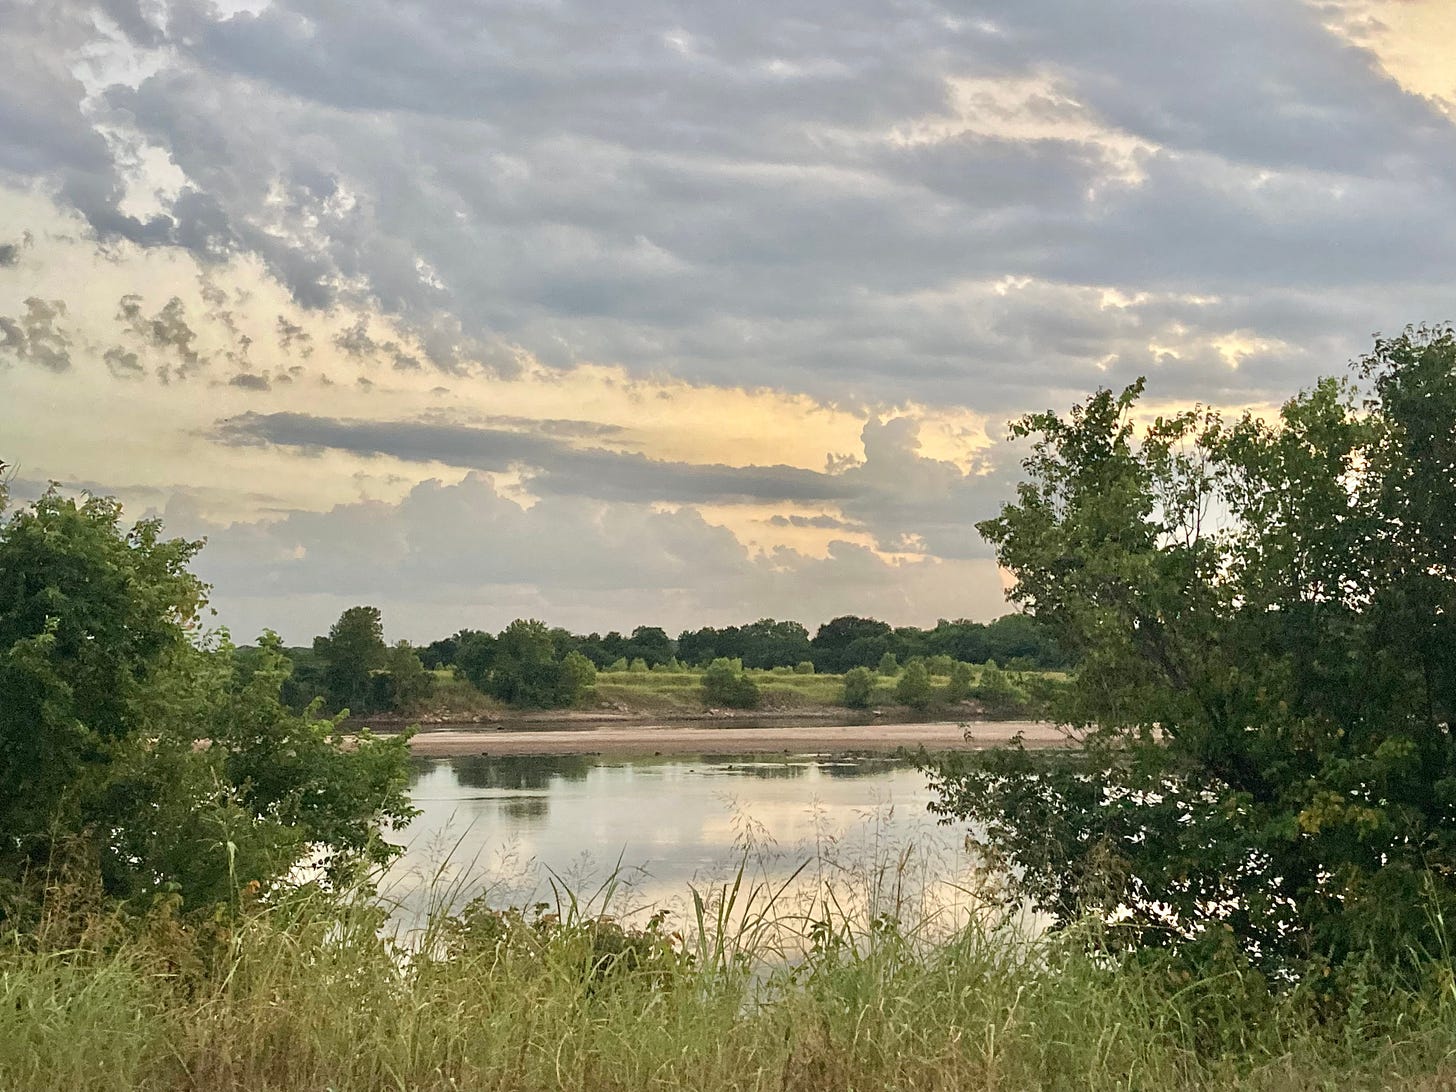 Framed by two trees and a blanket of grasses in the foreground, the photograph looks west over a placid Arkansas River beneath lavender grey clouds and patches of golden sky. The river is divided lengthwise by a long, pink sandbar and reflects layers of light and dark green vegetation on the opposite bank. 